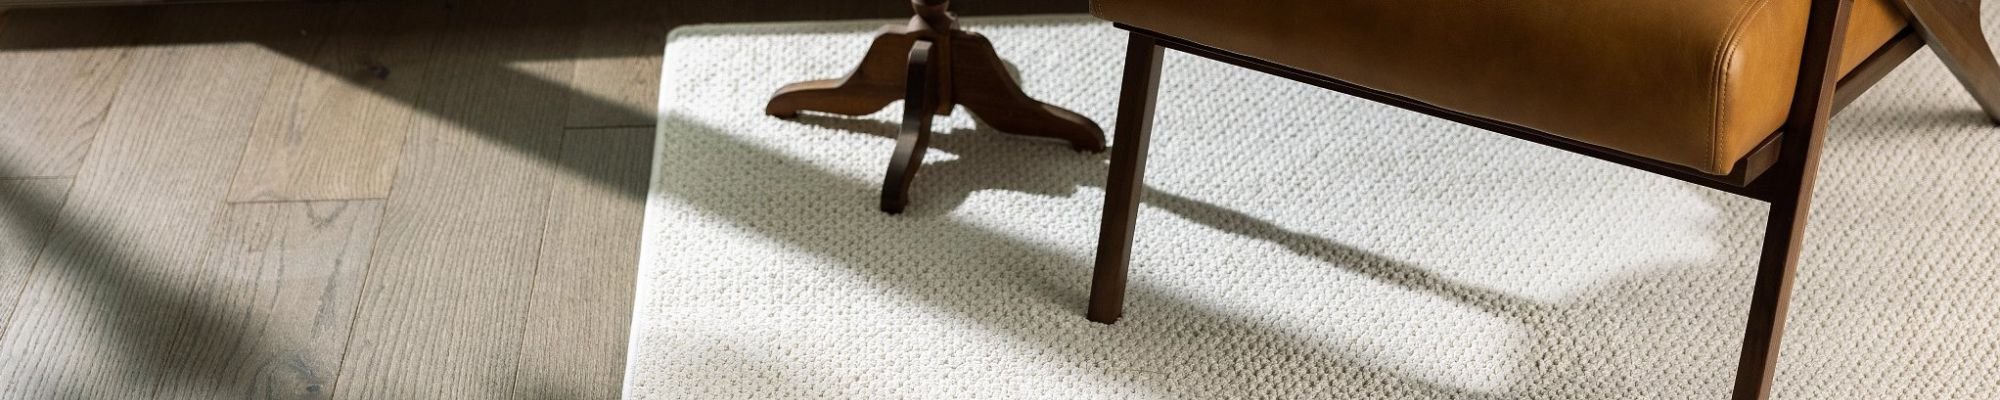 Chair and table on the rug - Taylorville Home Source in Taylorville